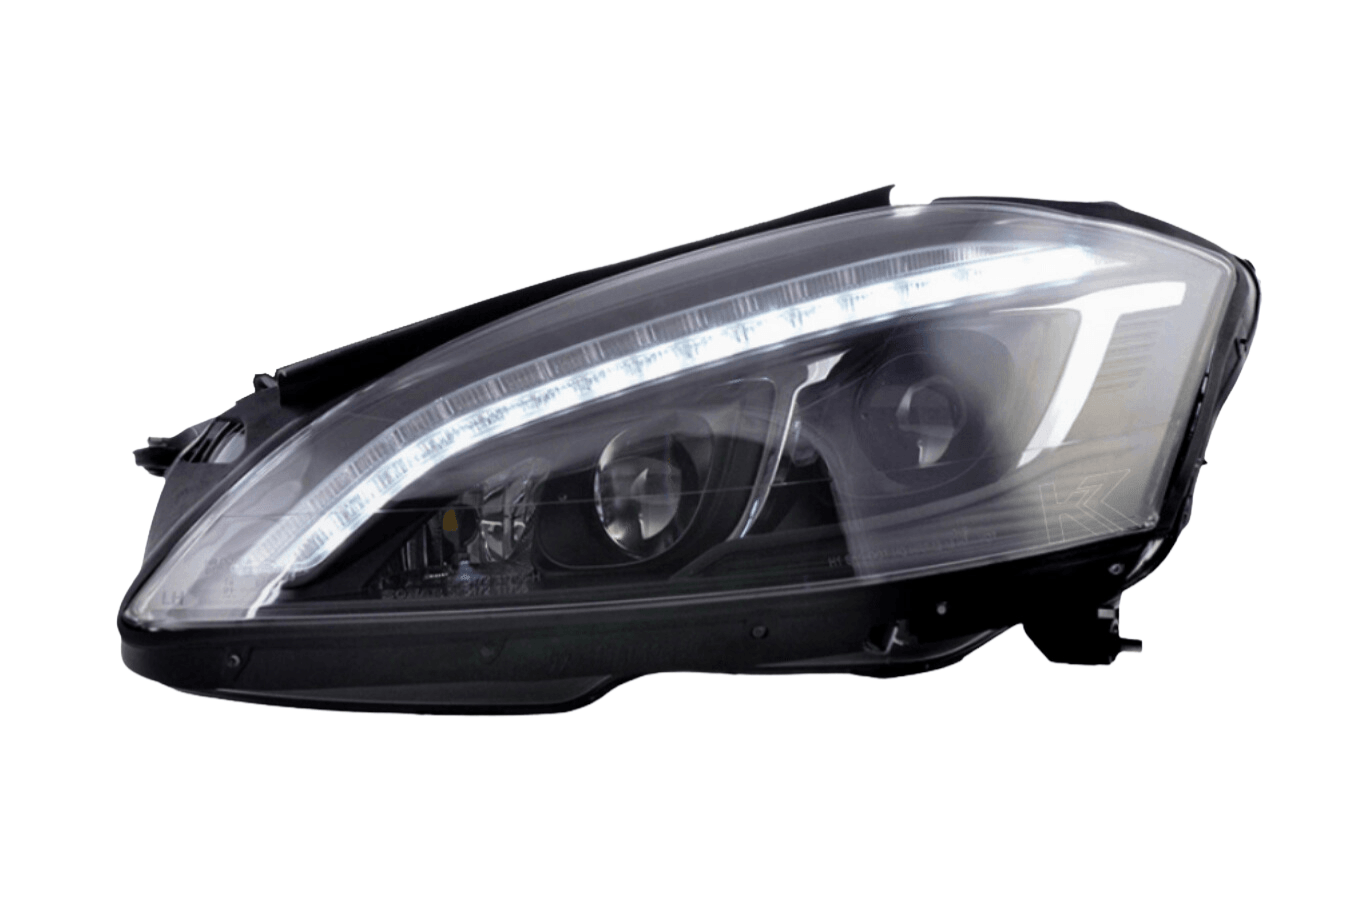 Mercedes Benz S-Class (221) Black LED Headlights with Daytime Running Lights (2005 - 2009) - K2 Industries